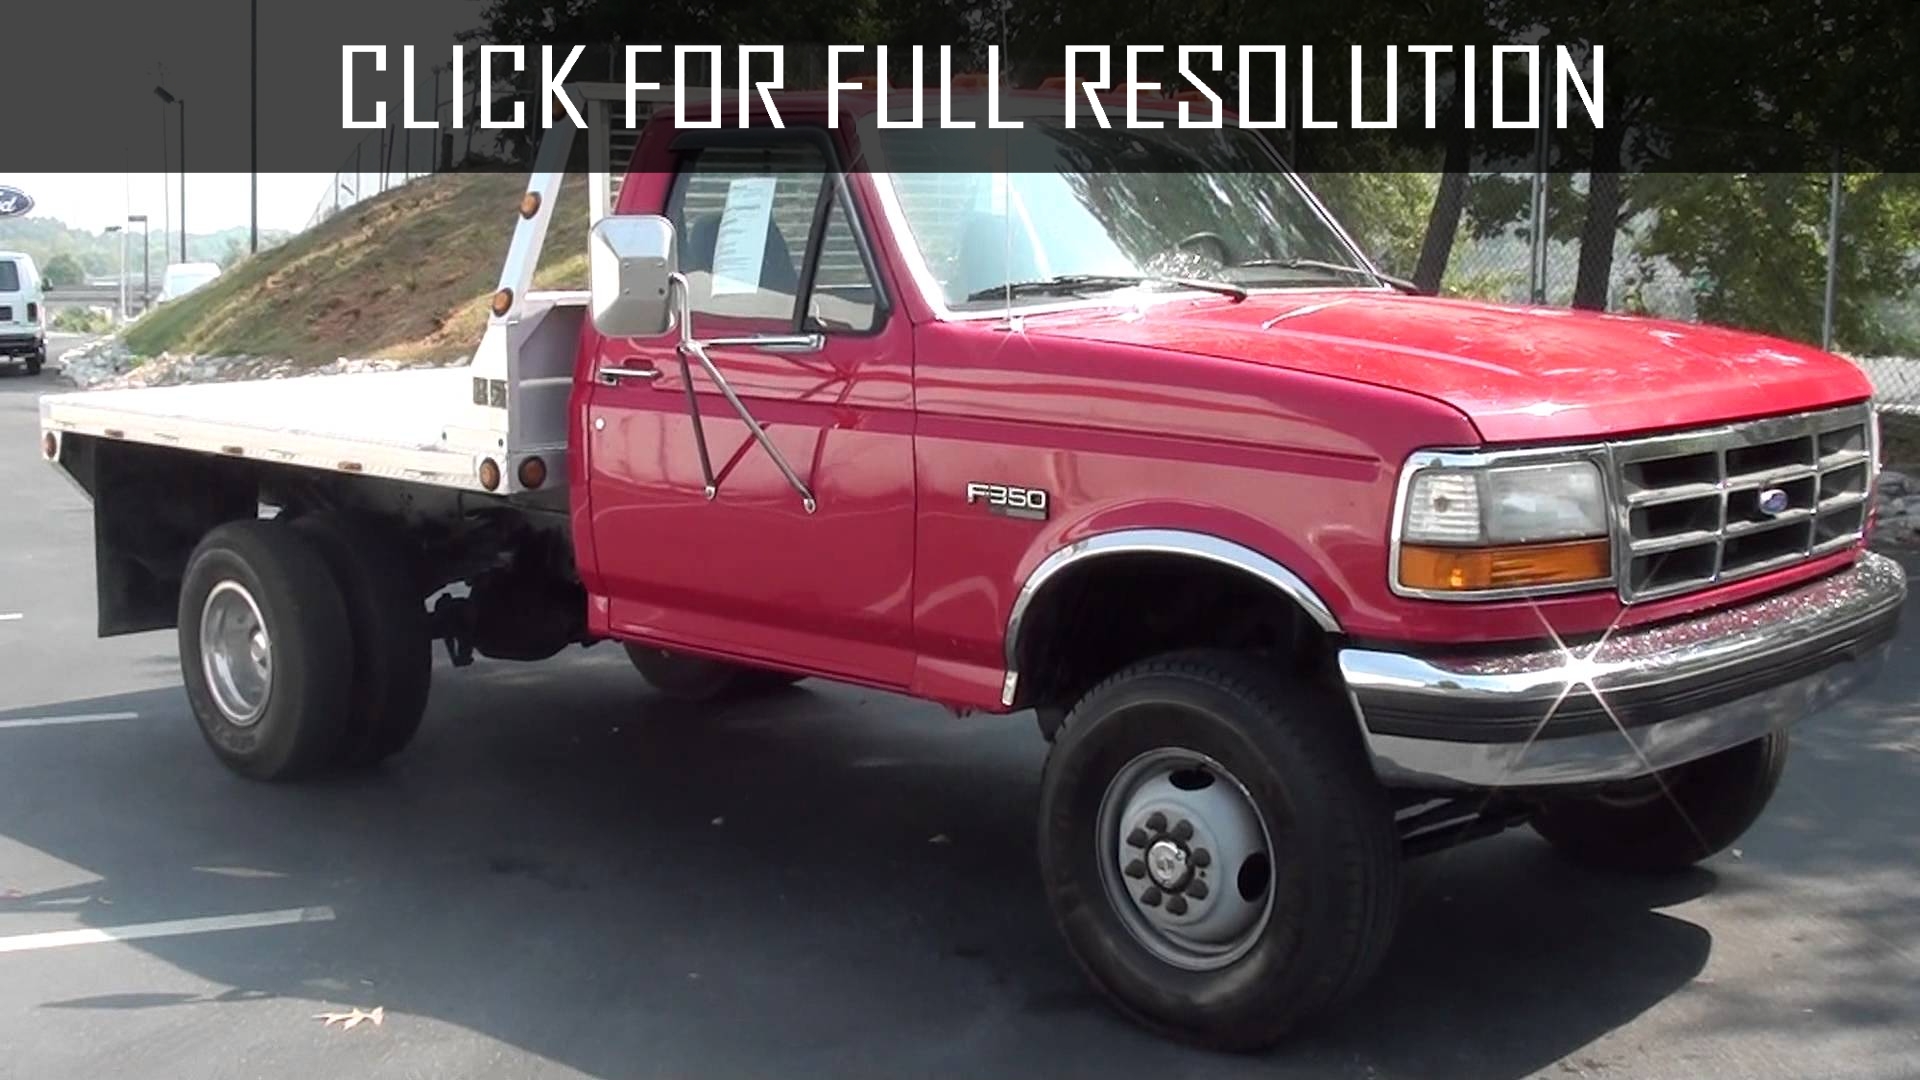 1996 Ford F350 Flatbed Best Image Gallery 10 13 Share And Download